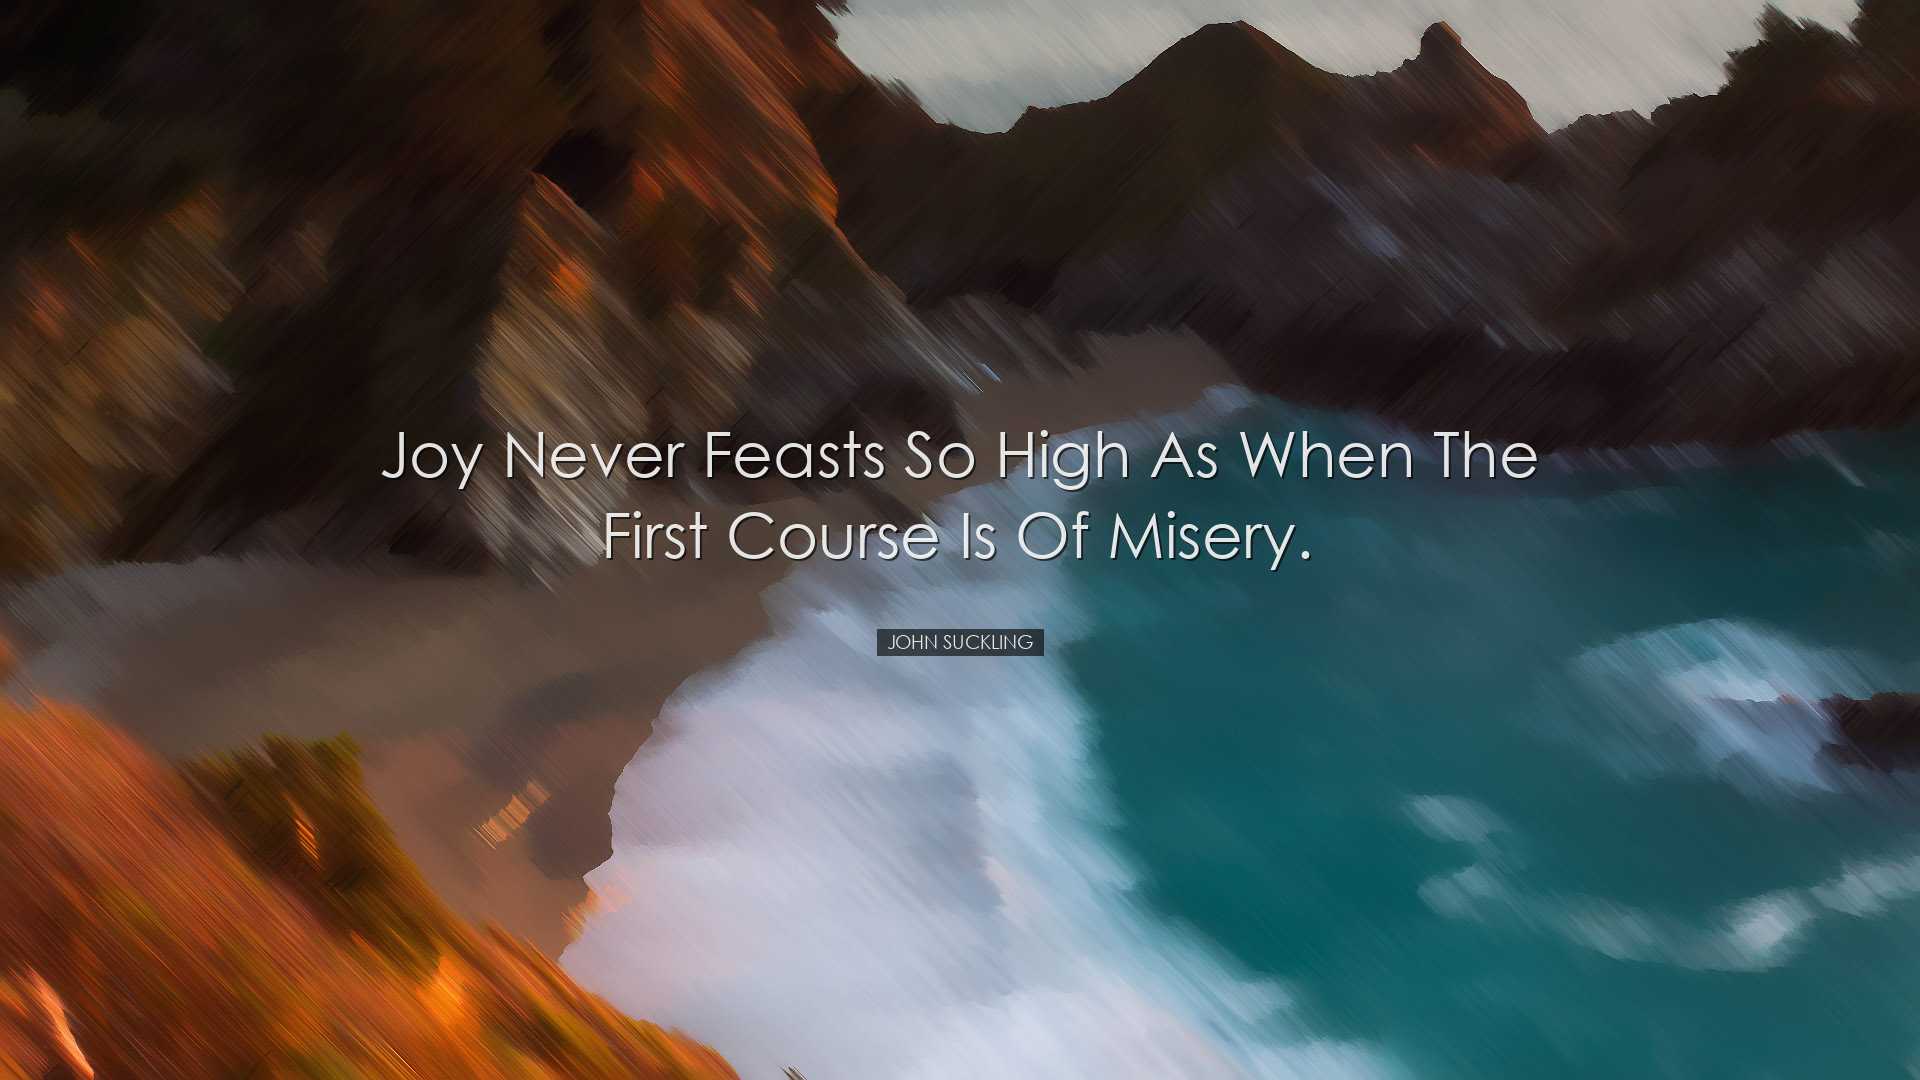 Joy never feasts so high as when the first course is of misery. -